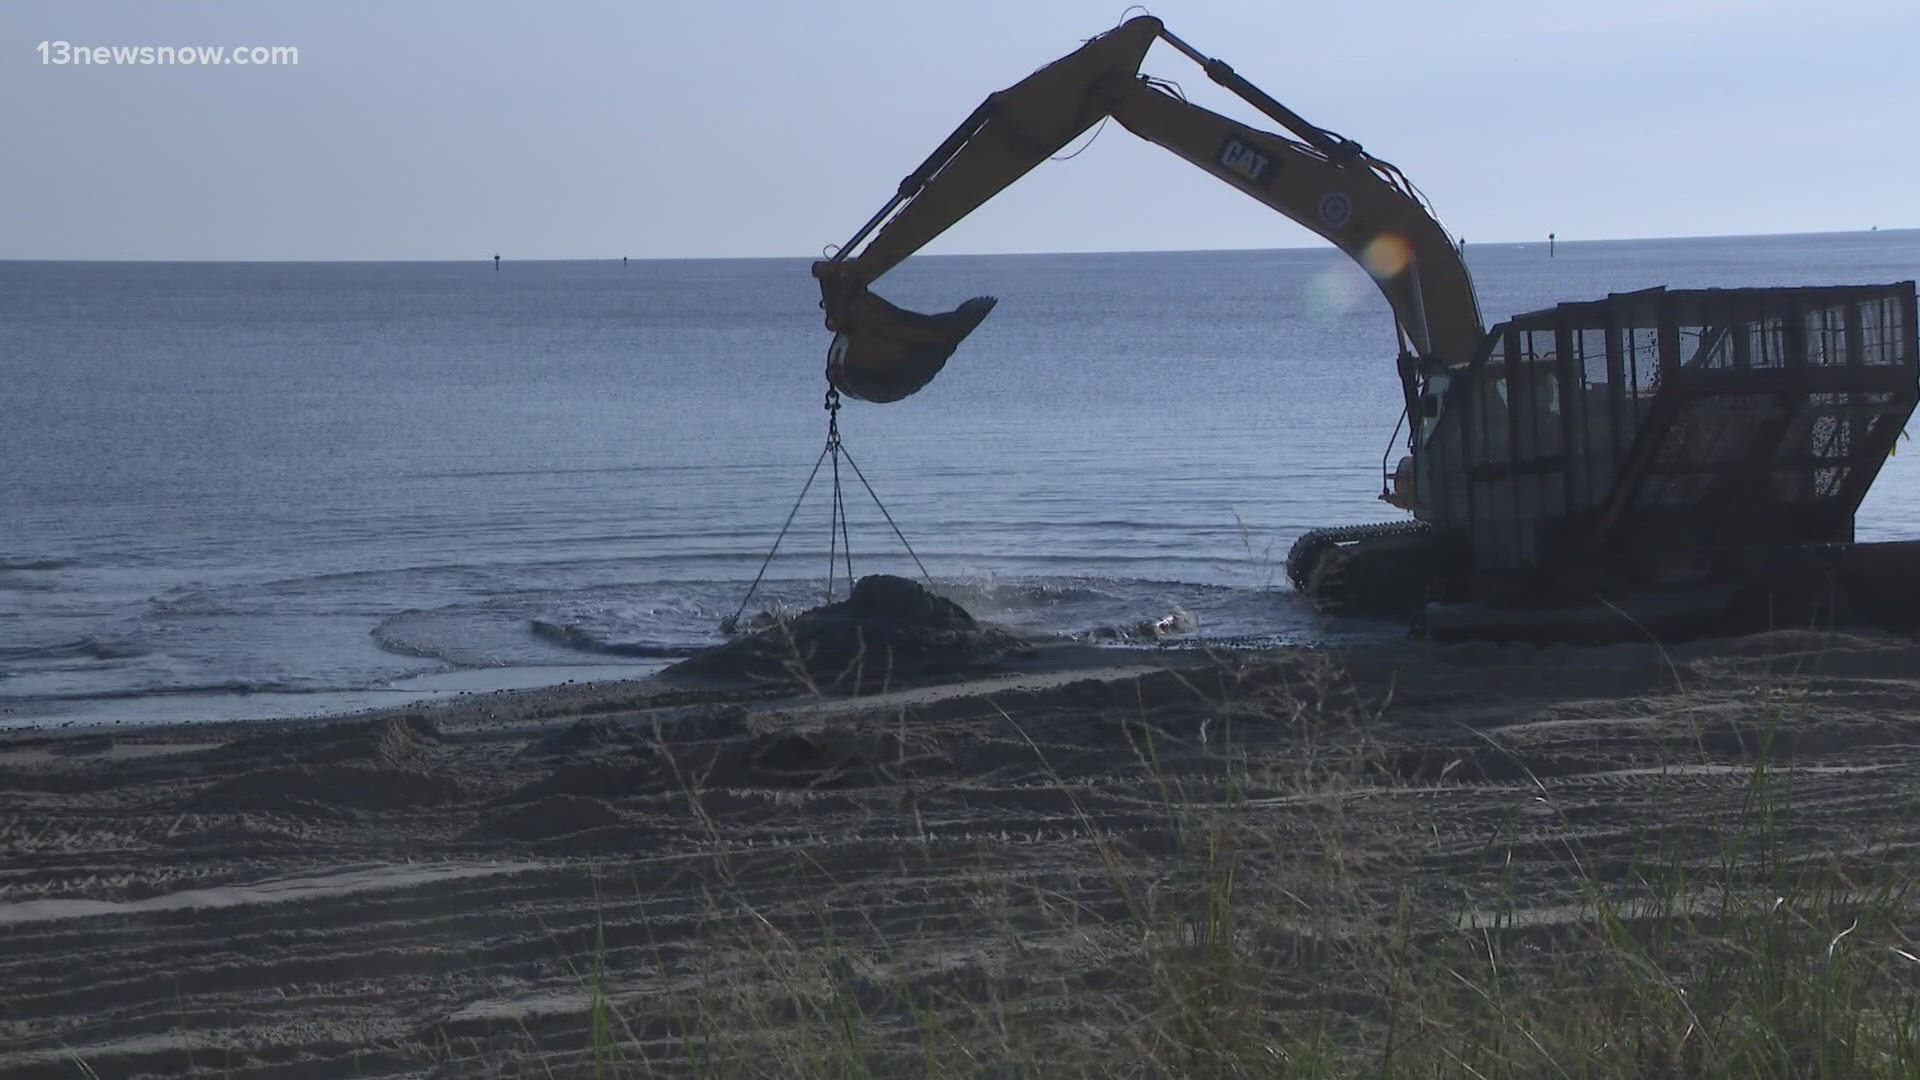 Multi-million dollar sand replenishment projects are happening more frequently, but new research could help us cut costs when it comes to beach rehab.